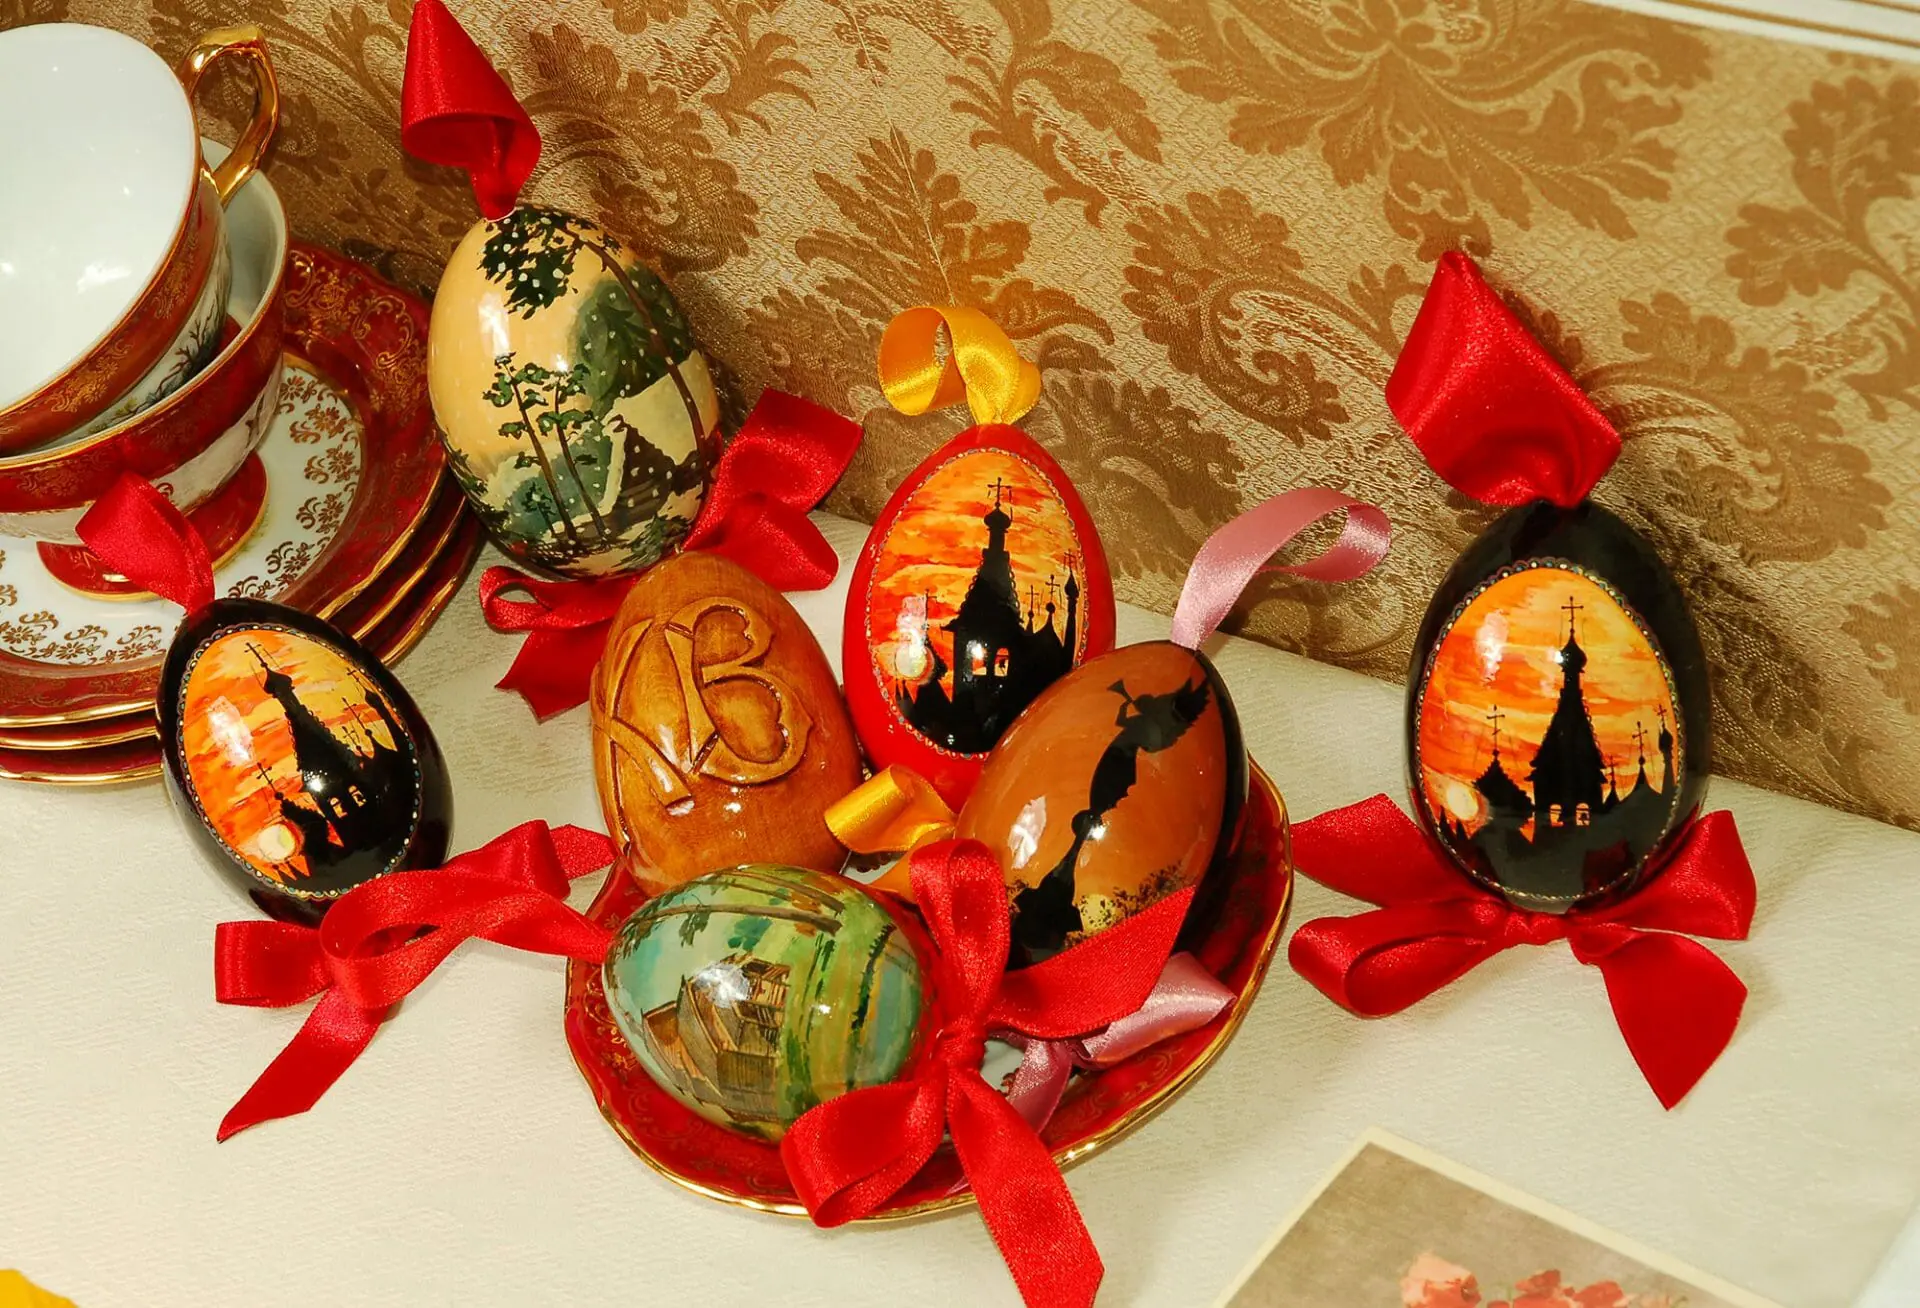 Hand-Carved Wooden Eggs, Easter, Gifts